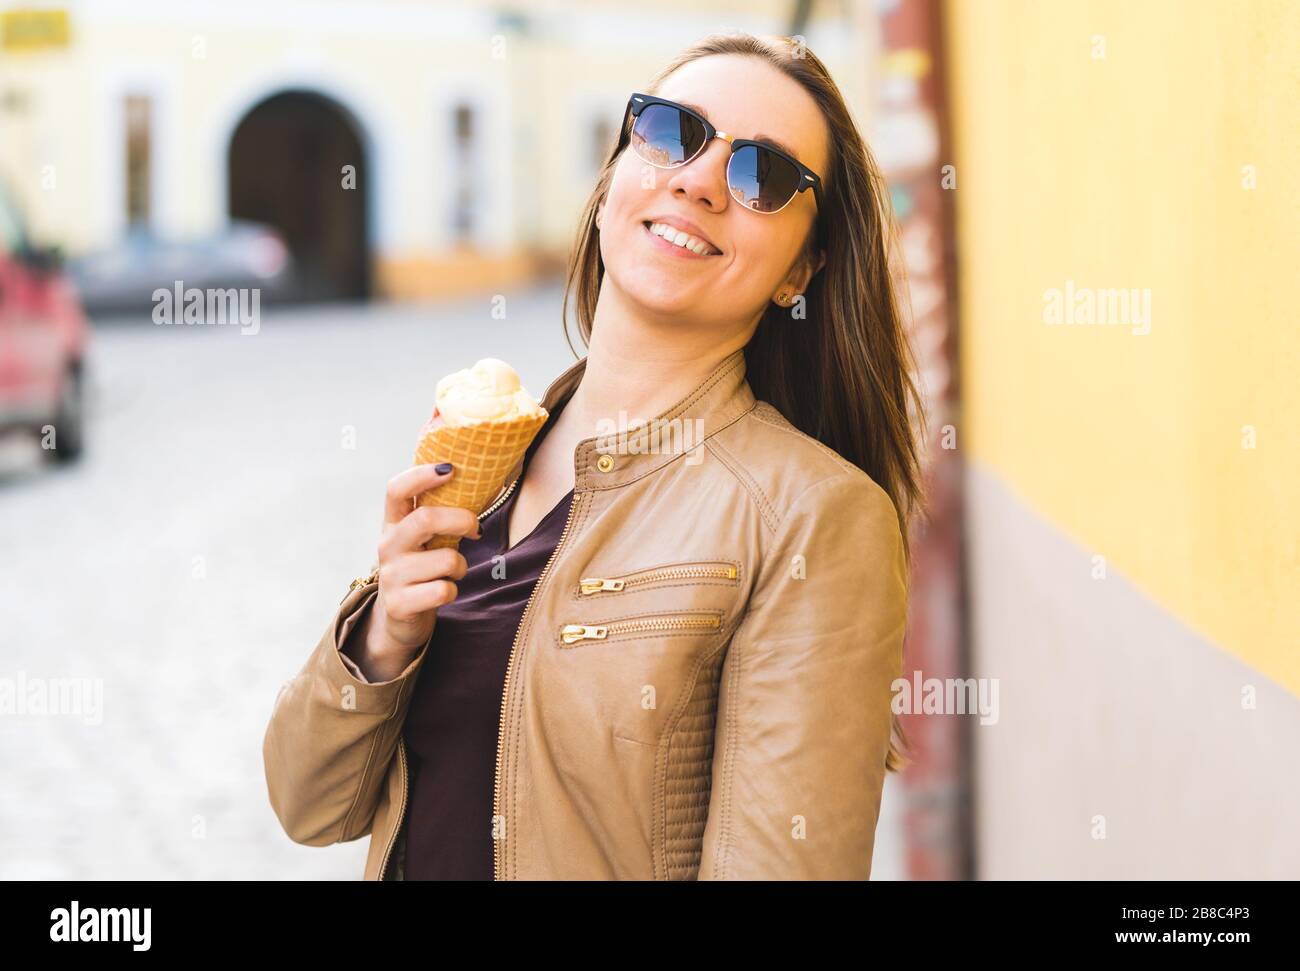 Excited and energetic woman holding ice cream cone in city. Happy stylish person eating sweet treat in urban street. Stock Photo